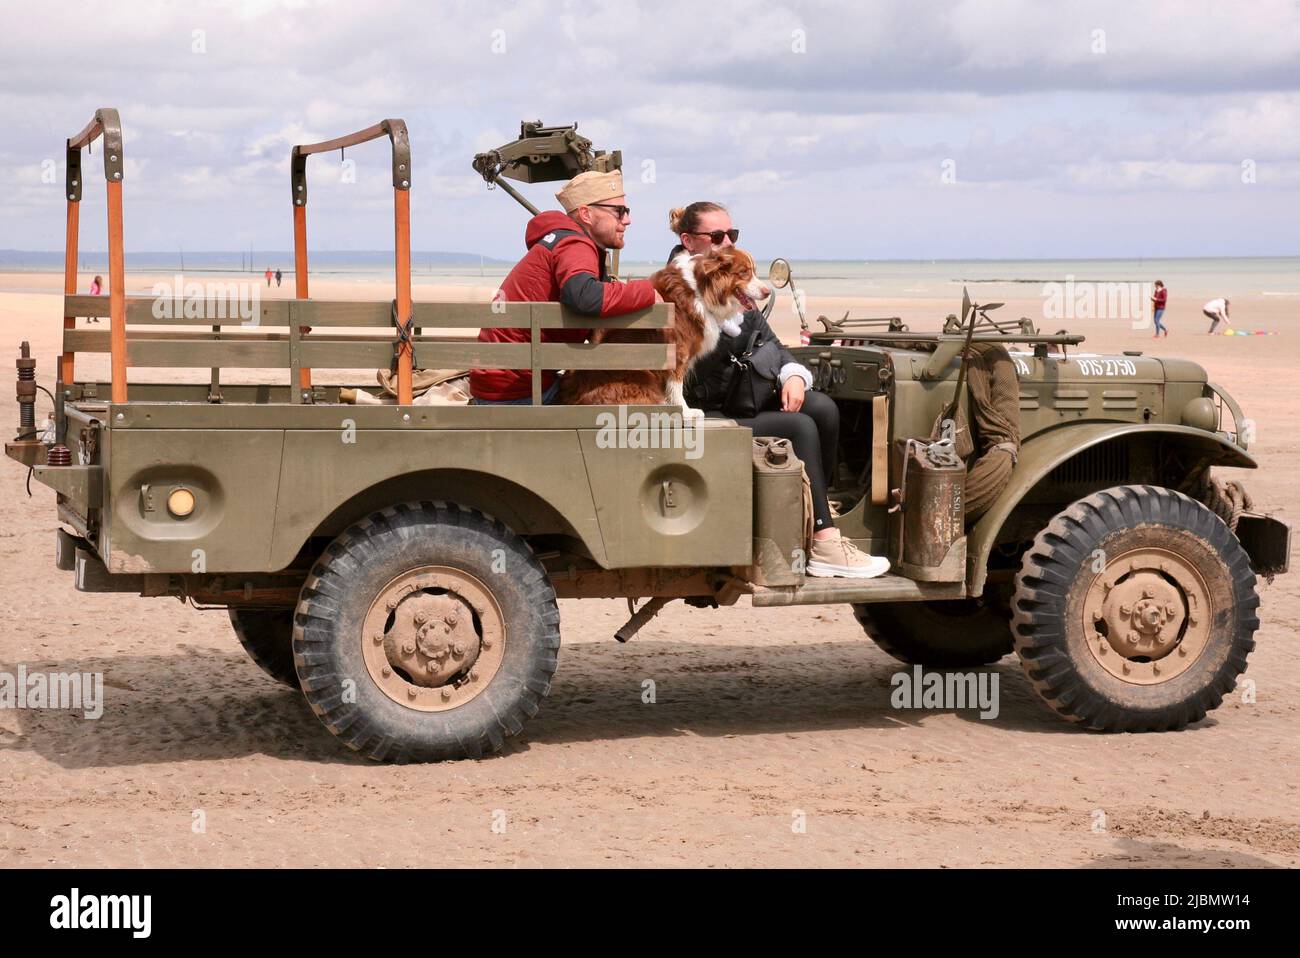 A family day out on Utah beach Stock Photo